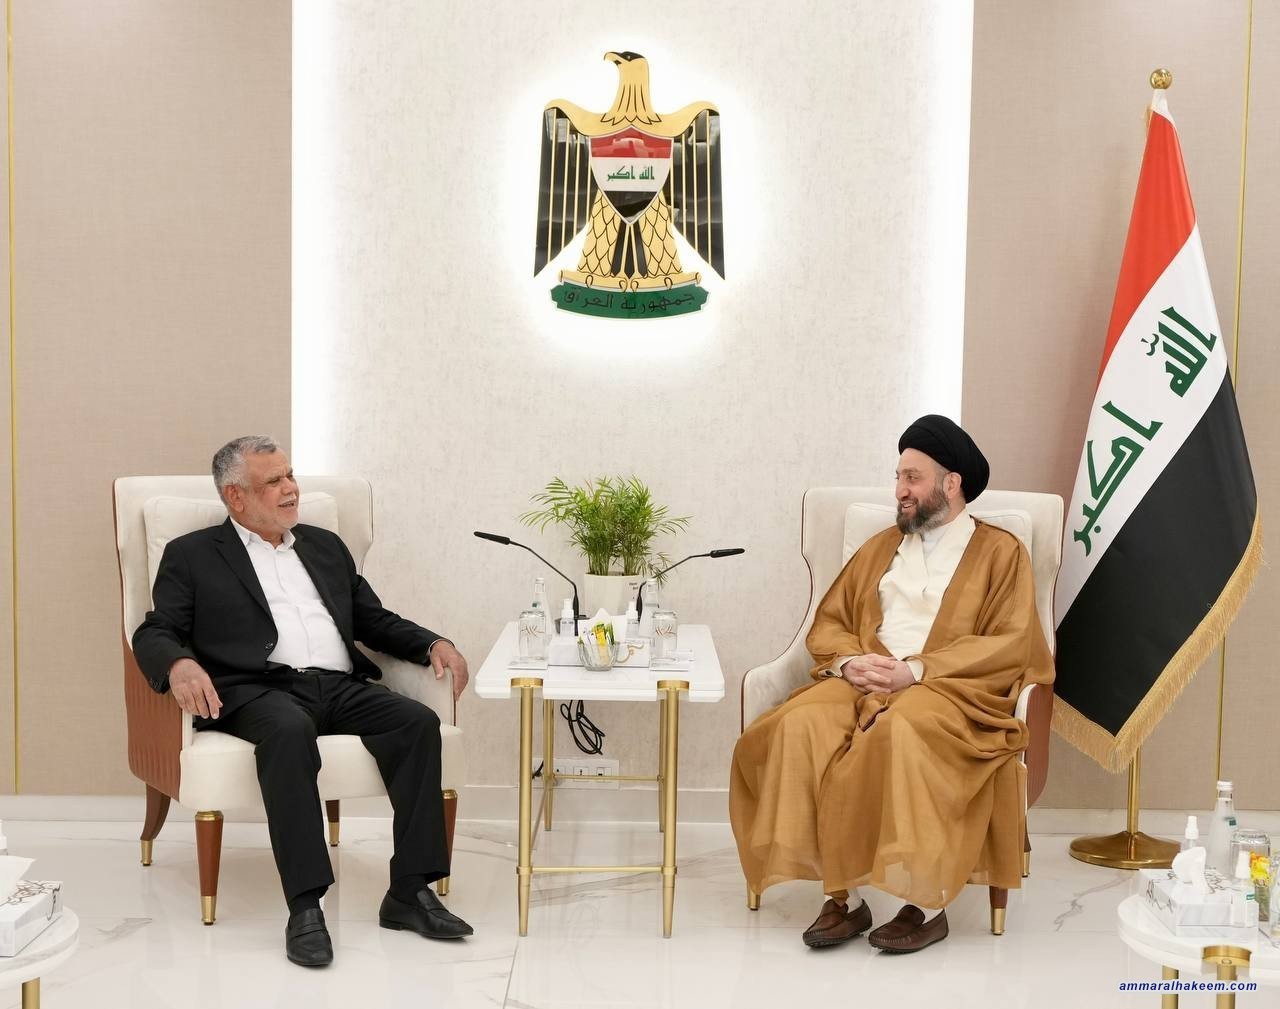 Sayyid Al-Hakeem meets Al-Amiry, discusses strengthening Coordination framework, State Running Coalition